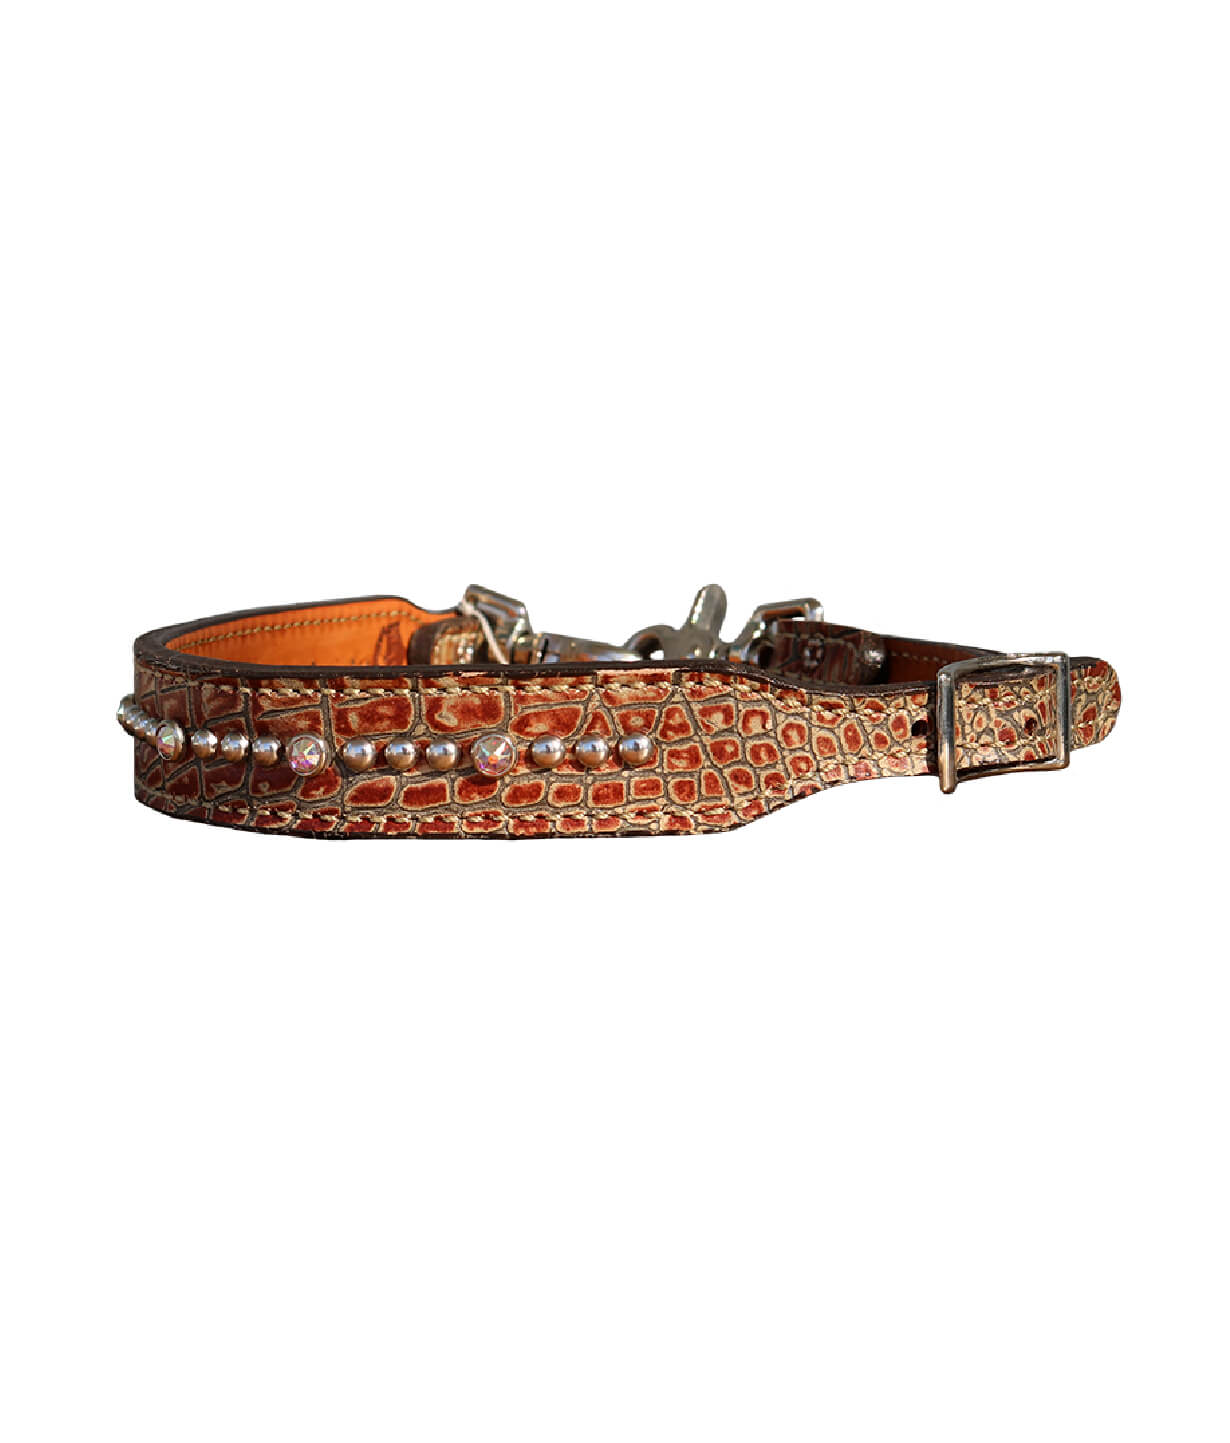 200-JGB Wither strap brown gator overlay with crystals and spots